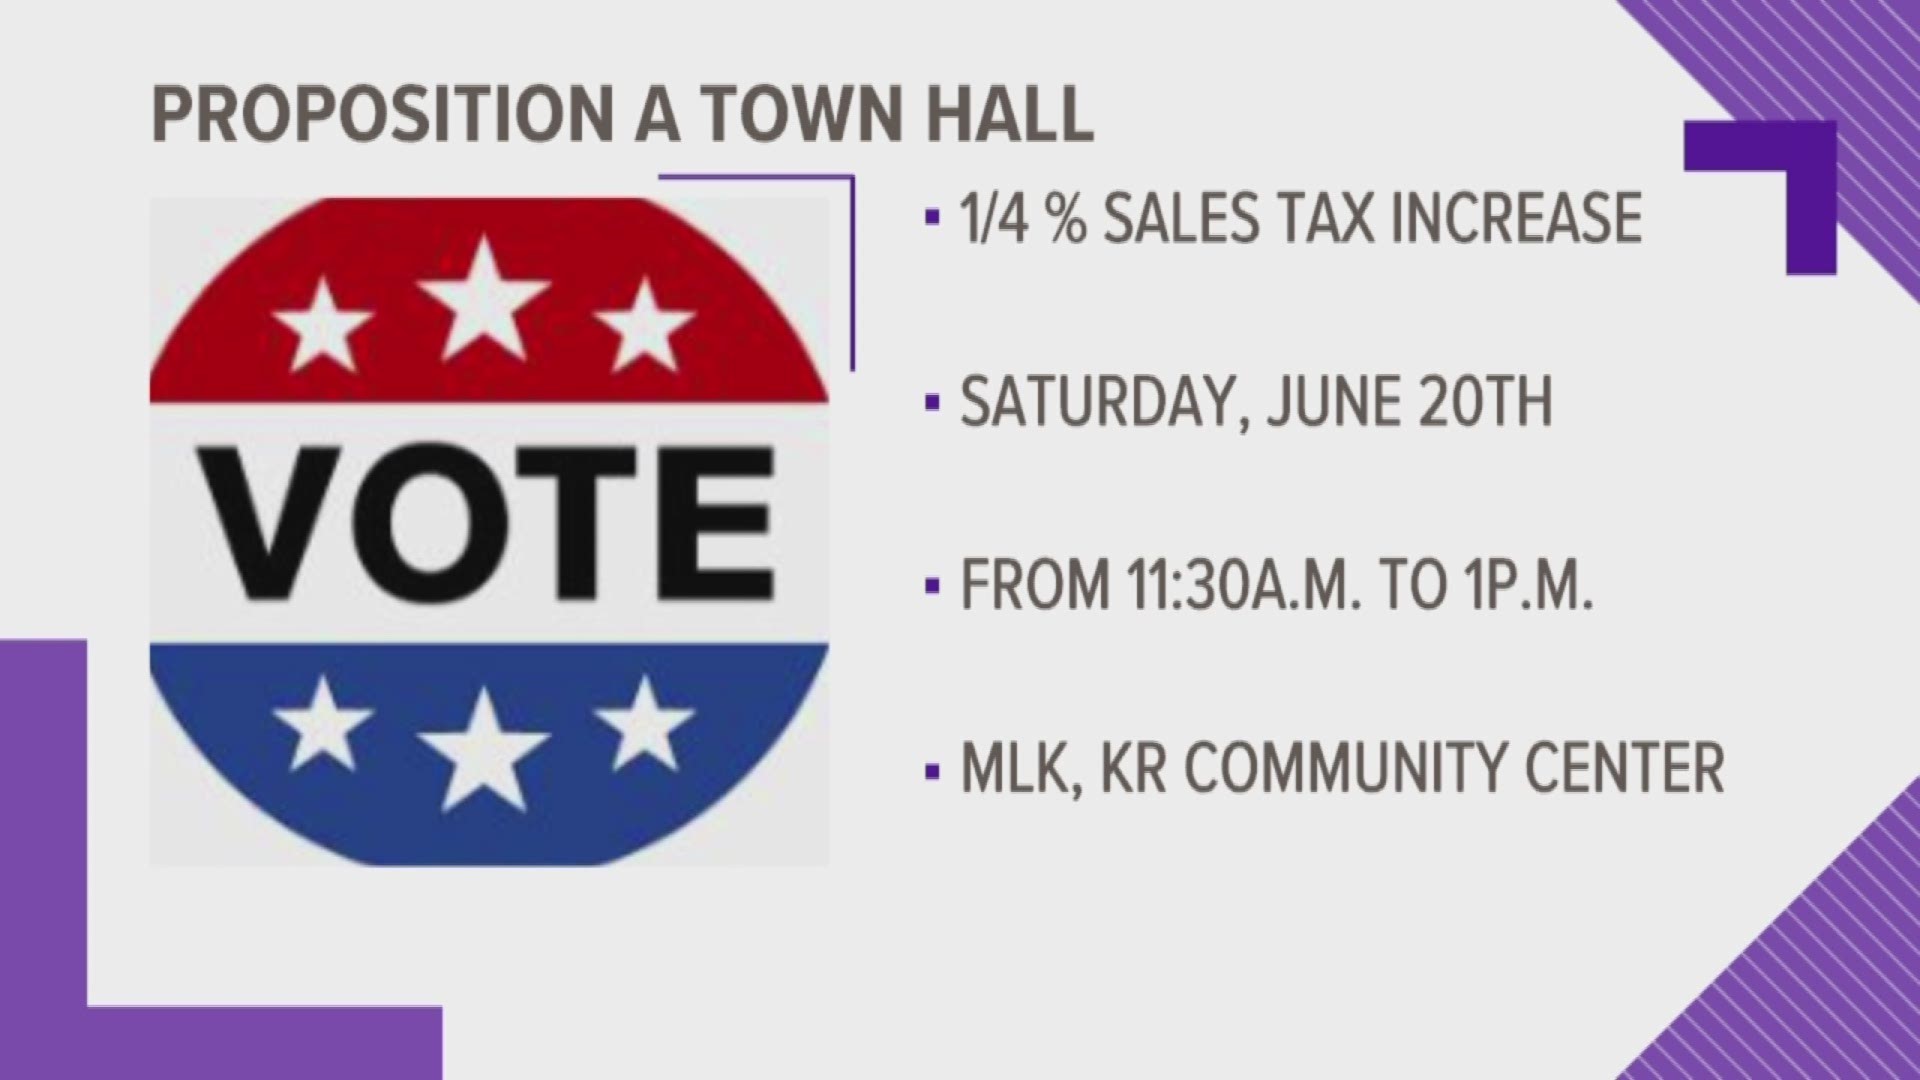 The town hall is Saturday, June 20 from 11:30 a.m. to 1:00 p.m.